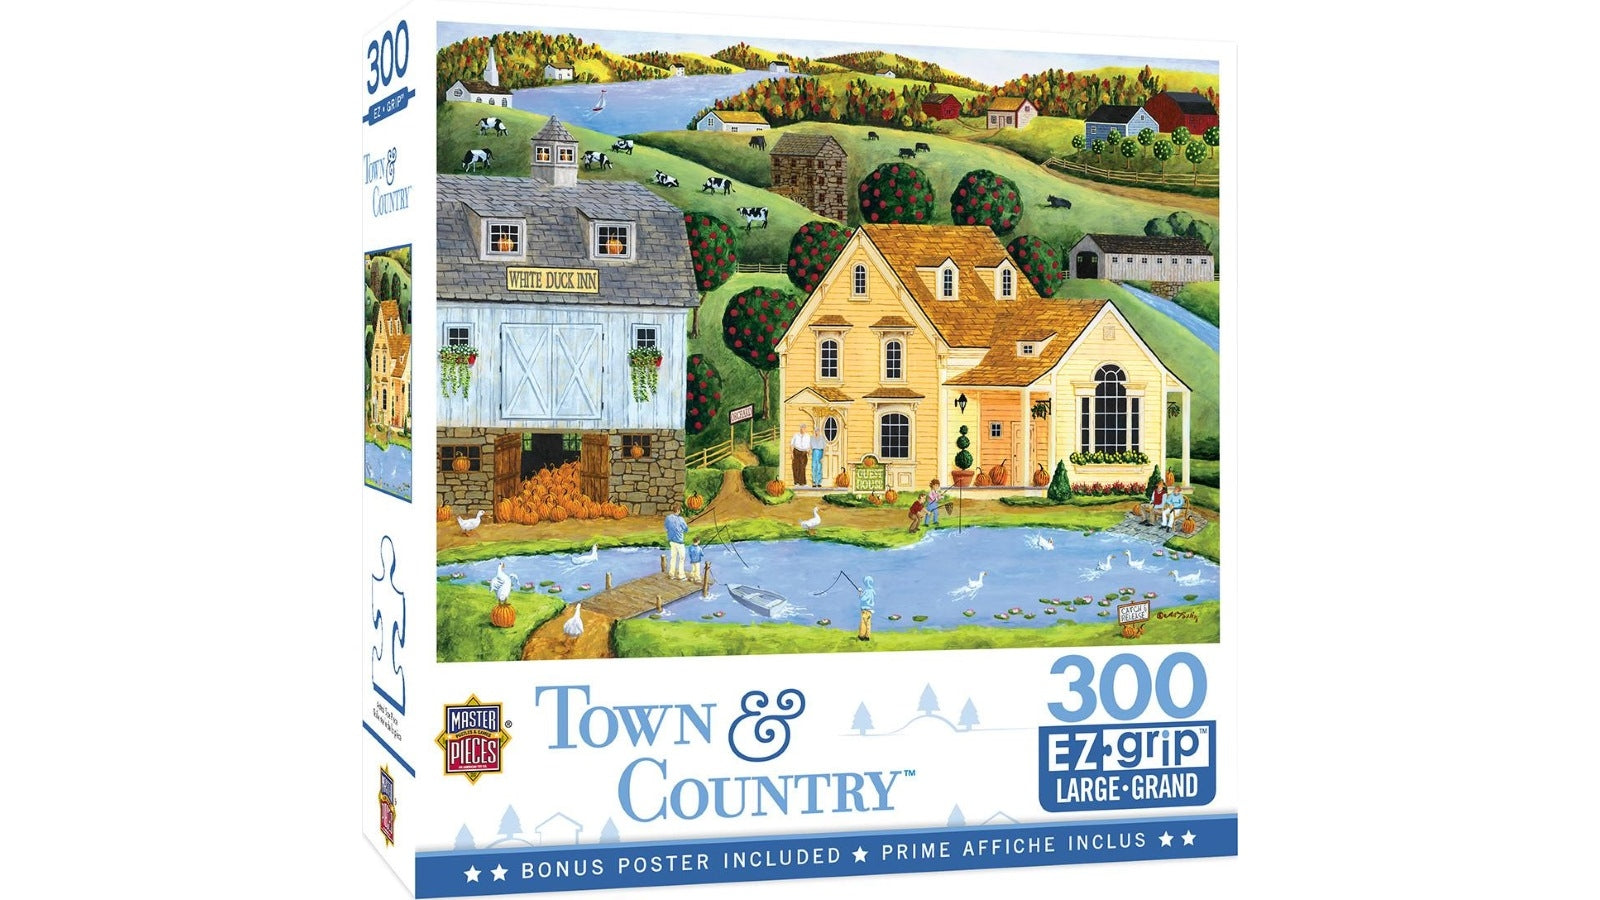 The White Duck Inn - Town & Country - 300XL pieces Masterpieces Puzzle